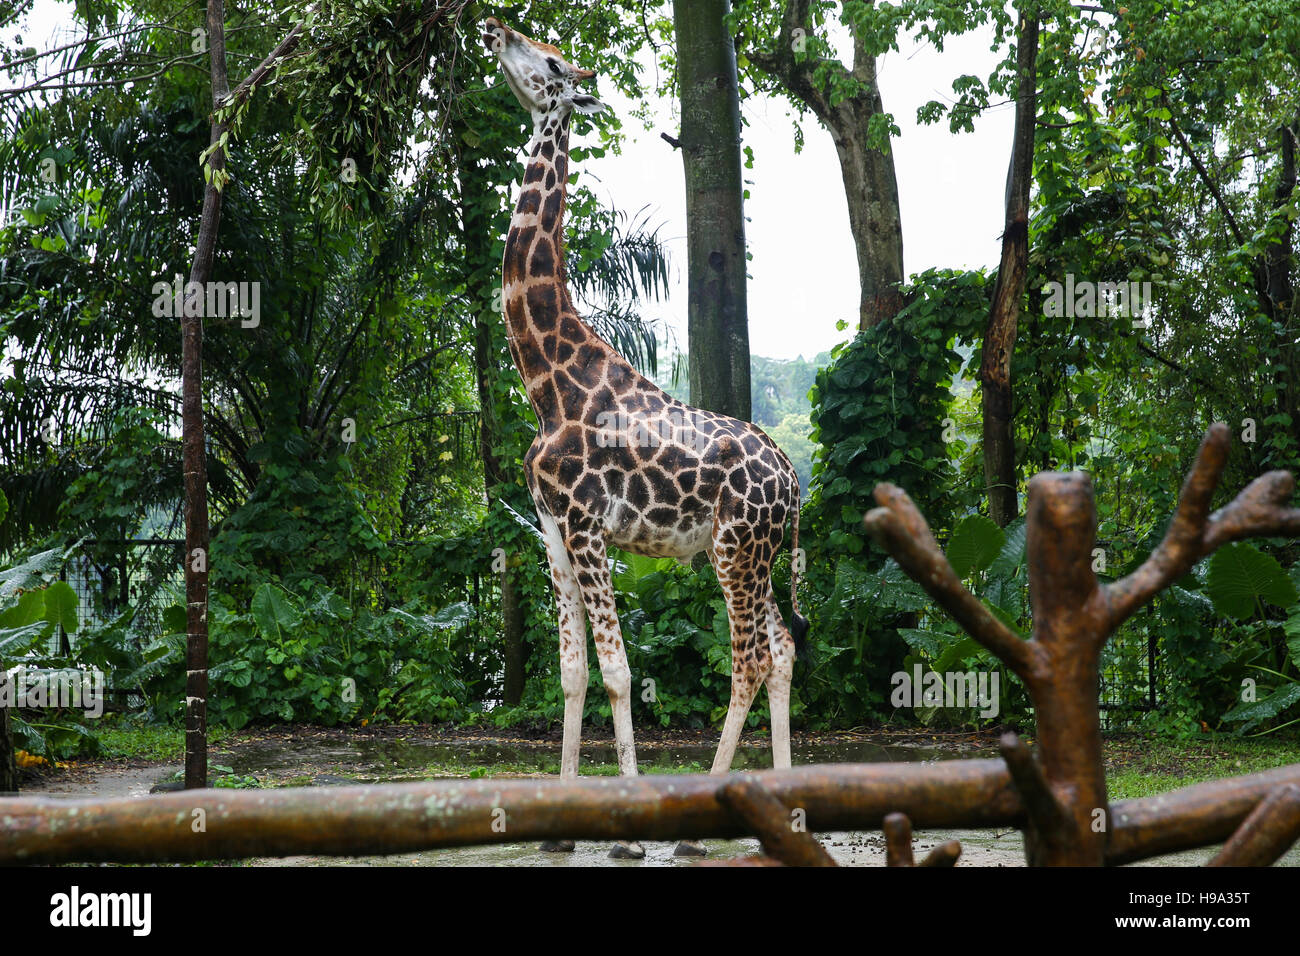 Giraffe nibbling leaves from the trees Stock Photo